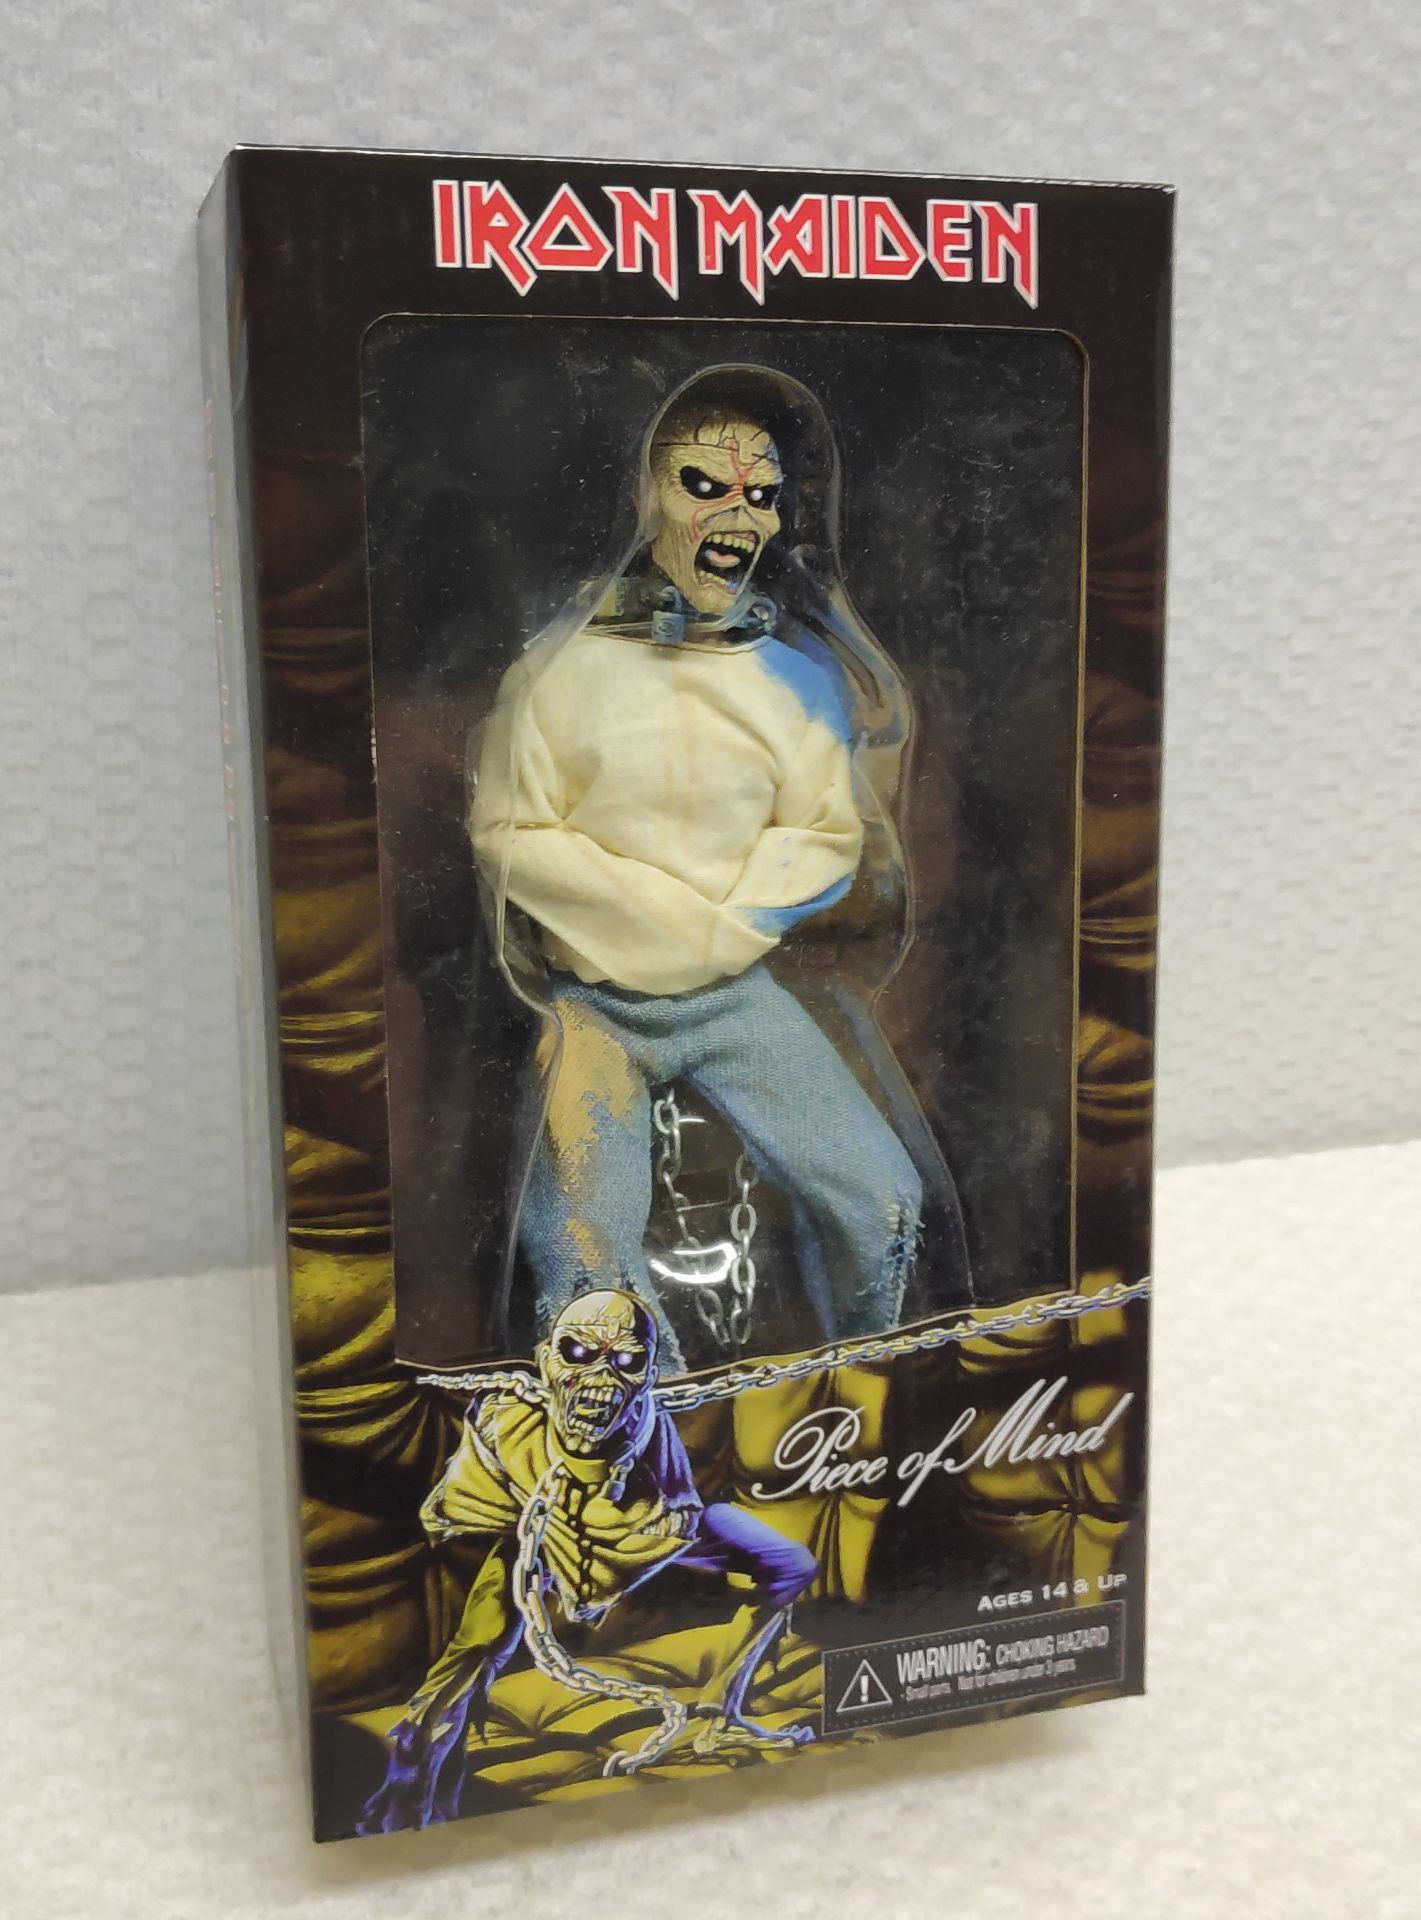 1 x Iron Maiden Eddie Piece of Mind NECA Action Figure - New/Boxed - HTYS166 - CL720 - Location: Alt - Image 5 of 10